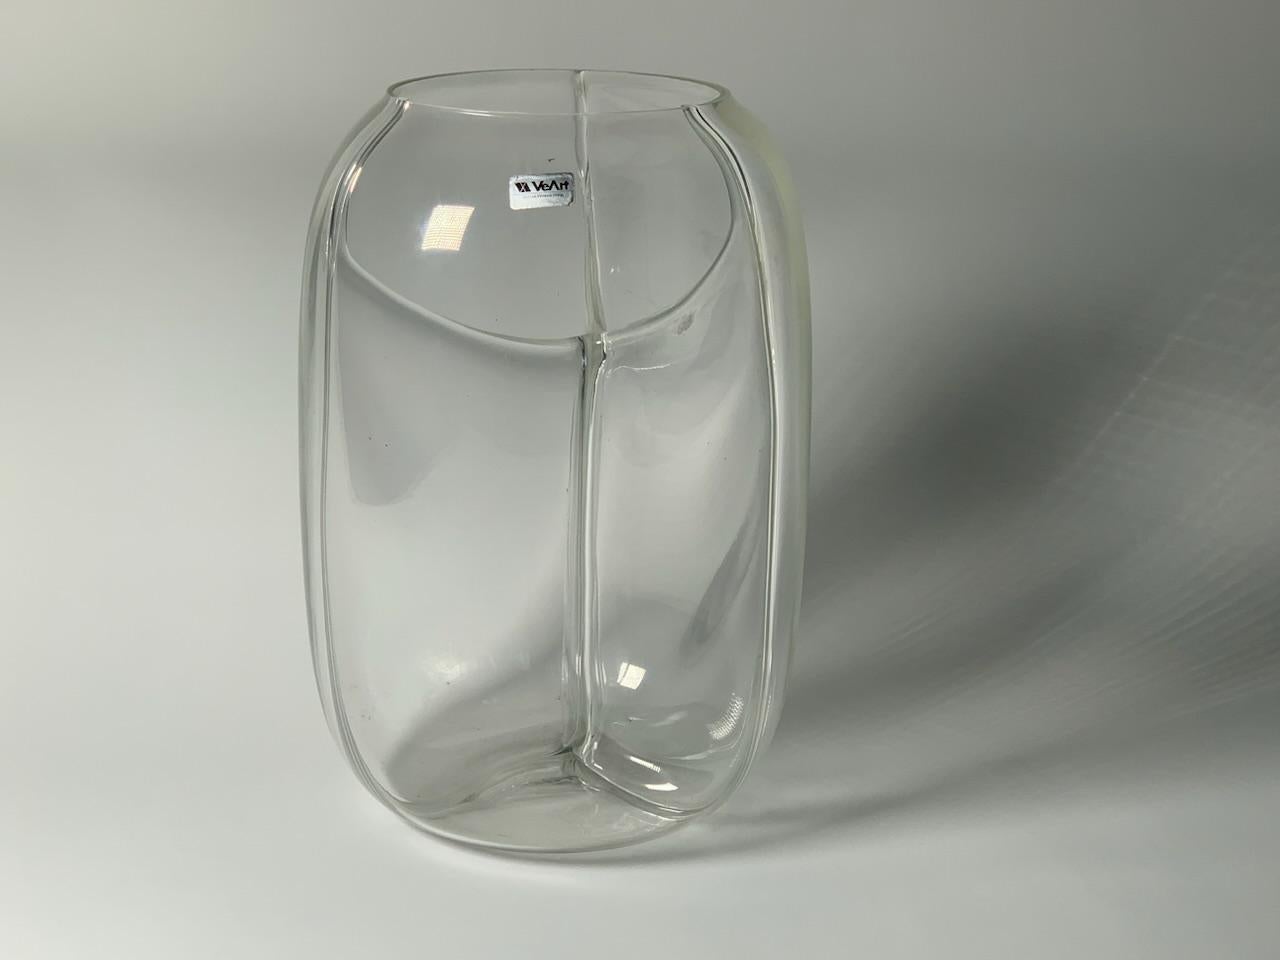 Italian Murano Glass Vase Membrane Model by Toni Zuccheri for VeArt In Excellent Condition For Sale In Milan, Italy